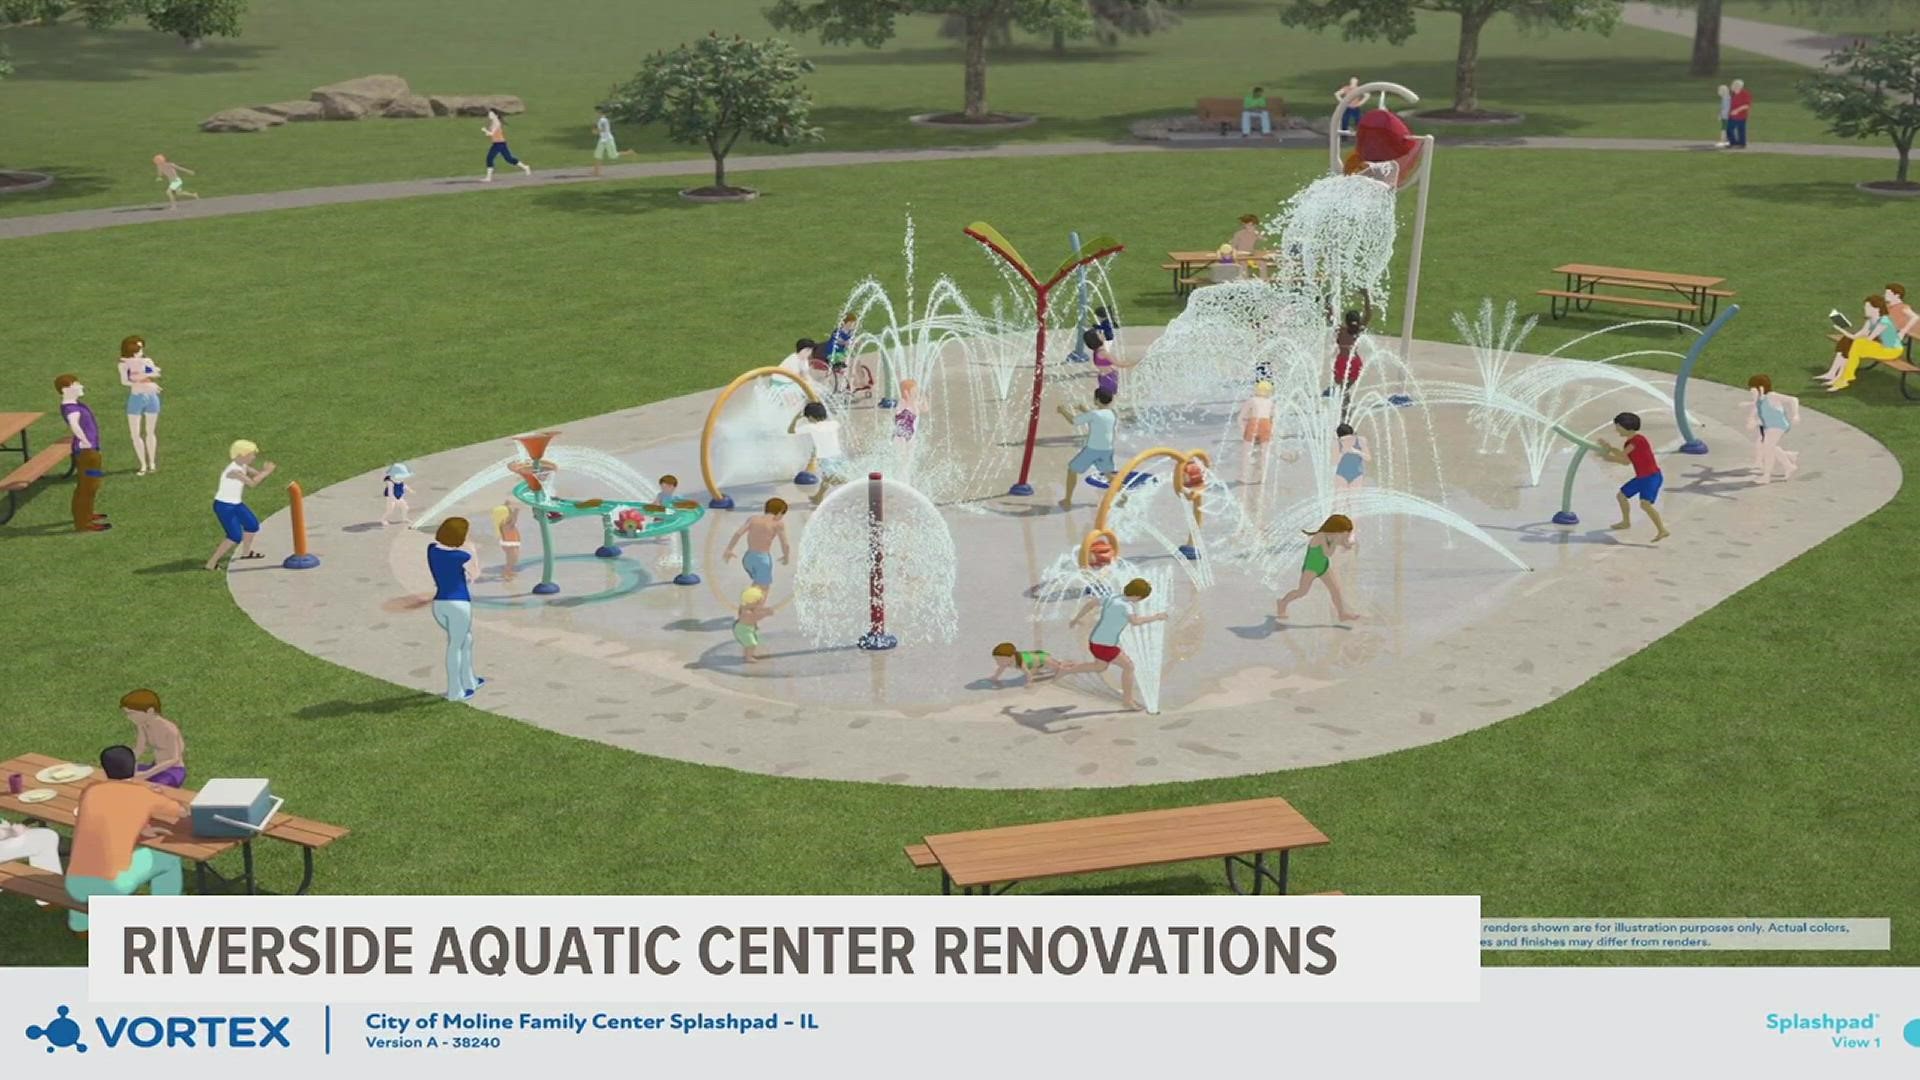 Moline's Riverside Family Aquatic Center will receive over $6.8 million in renovations to take place in 2023. Renovations include a lazy river and a splash pad!